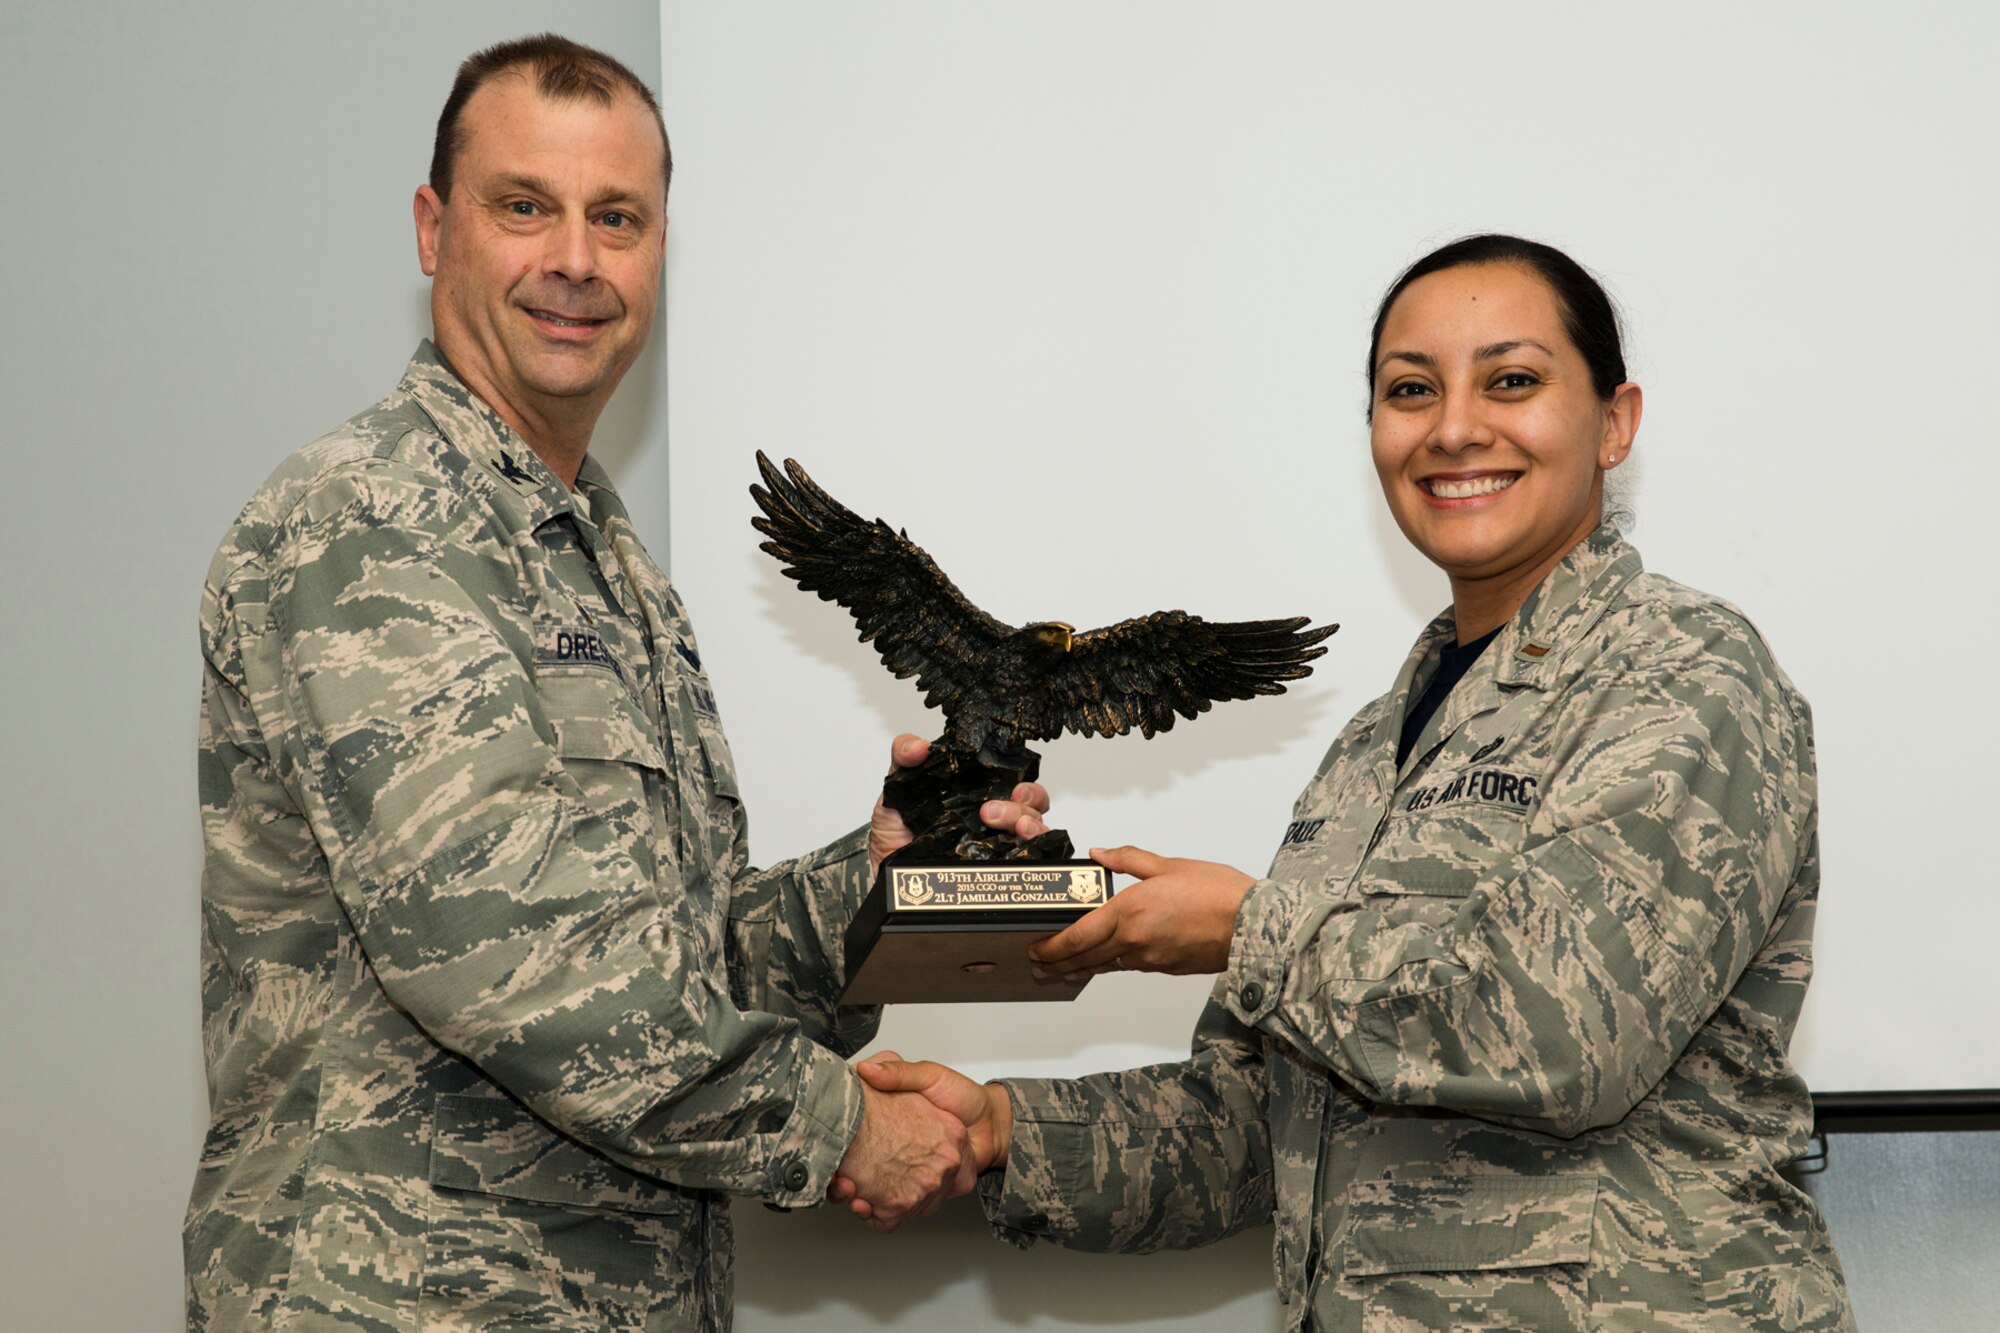 U.S. Air Force Reserve Col. Craig Drescher, commander, 913th Airlift Group, and 2nd Lt. Jamillah Gonzalez, director, Equal Opportunity, 913 AG, pose for a photo during a Commander’s Call at Little Rock Air Force Base, Ark., Mar. 13, 2016. Gonzalez was presented with the 2015 Company Grade Officer of the Year award for the 913 AG. (U.S. Air Force photo by Master Sgt. Jeff Walston/Released)